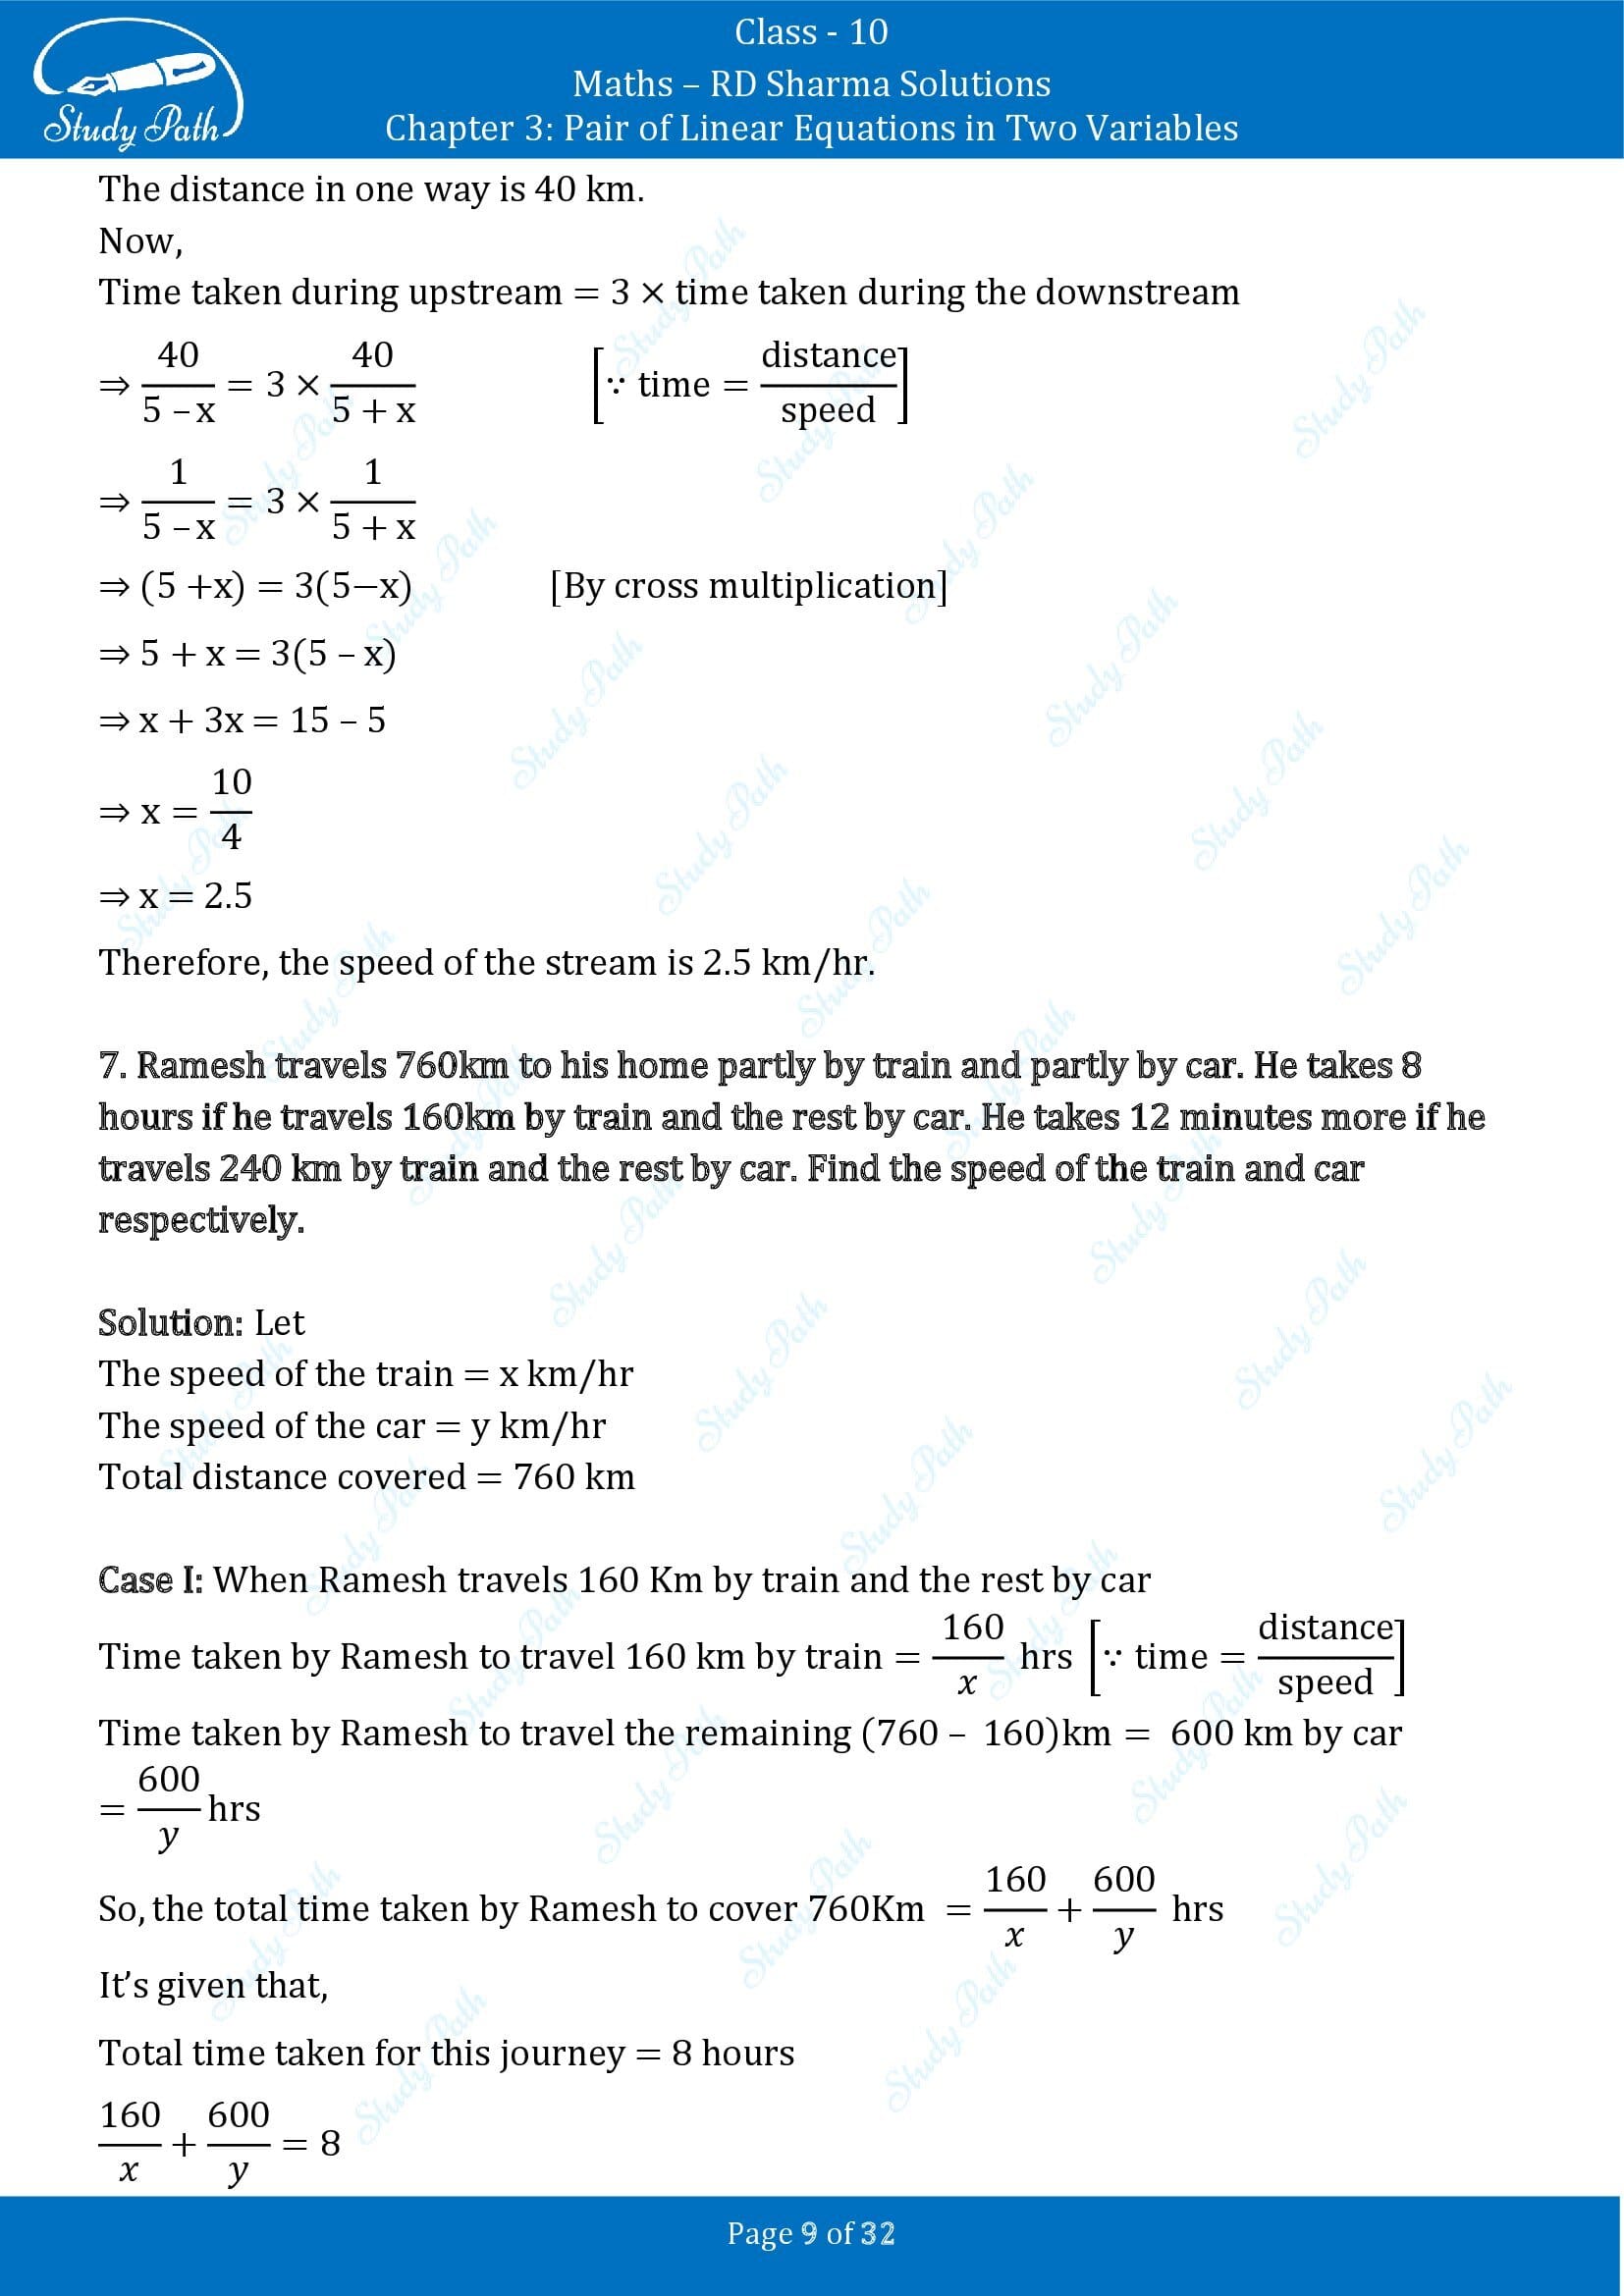 RD Sharma Solutions Class 10 Chapter 3 Pair of Linear Equations in Two Variables Exercise 3.10 00009